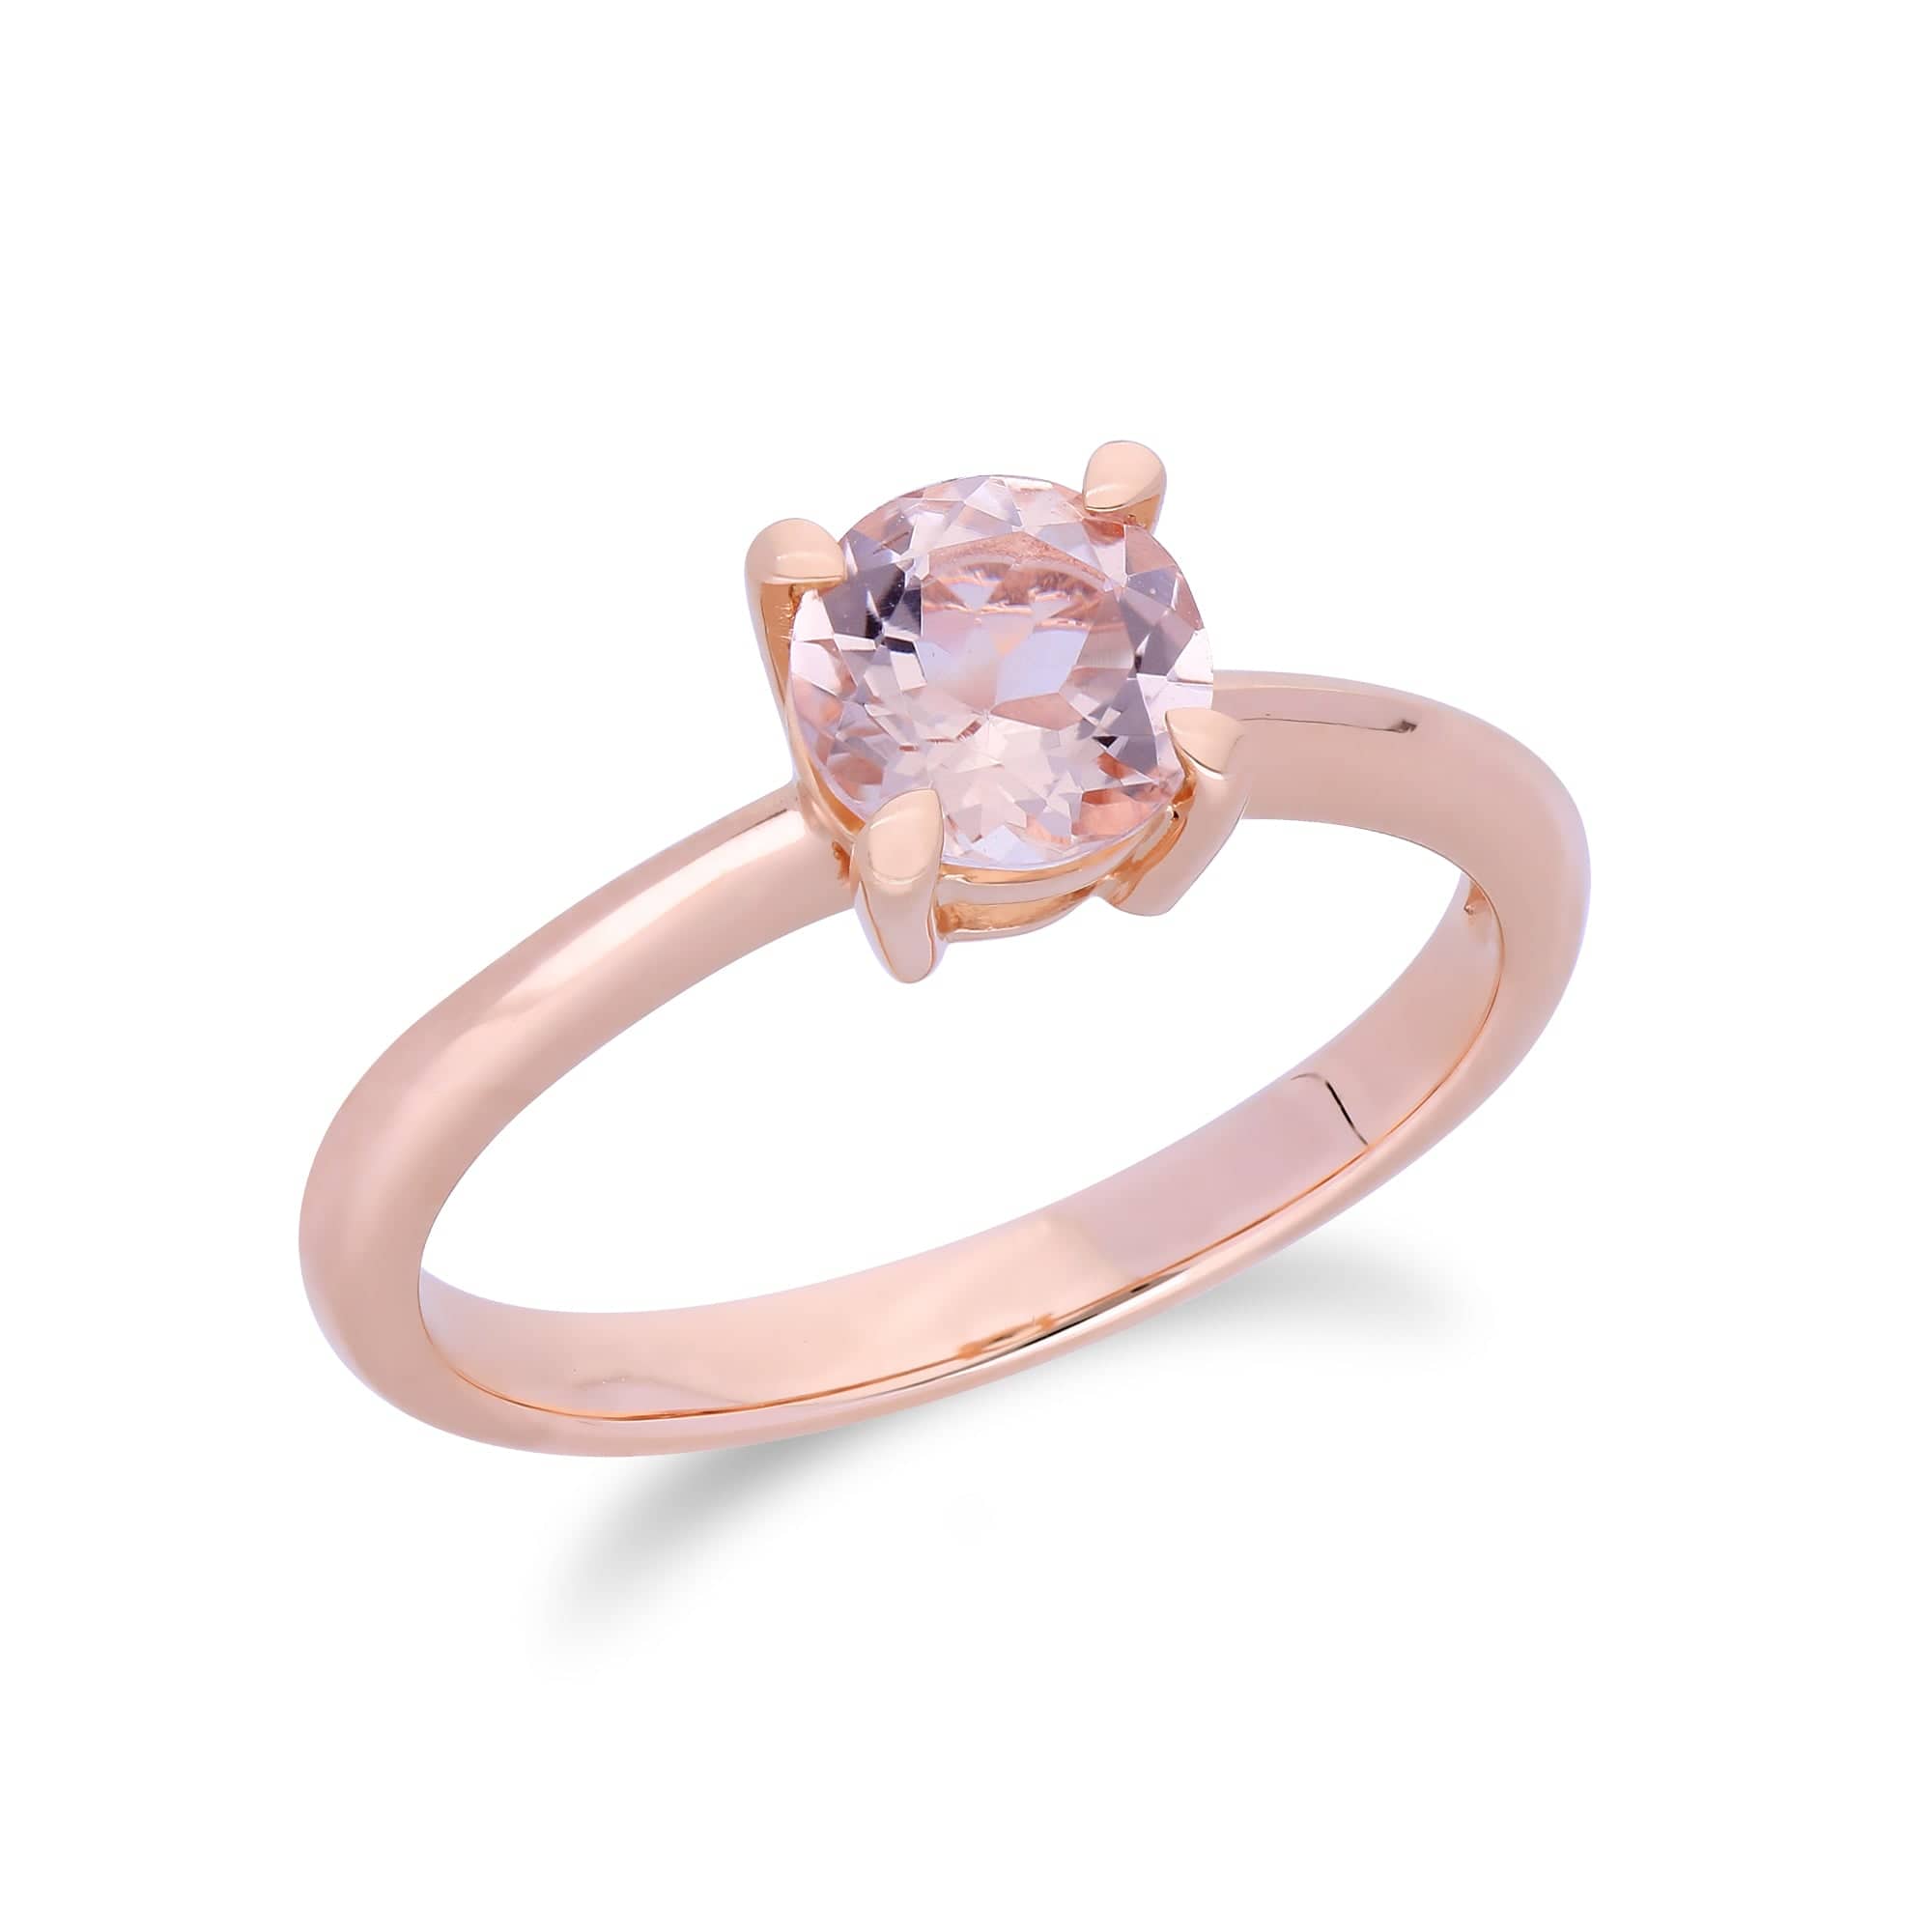 135R1526019 Classic Round Solitaire Morganite Ring in 9ct Rose Gold 2